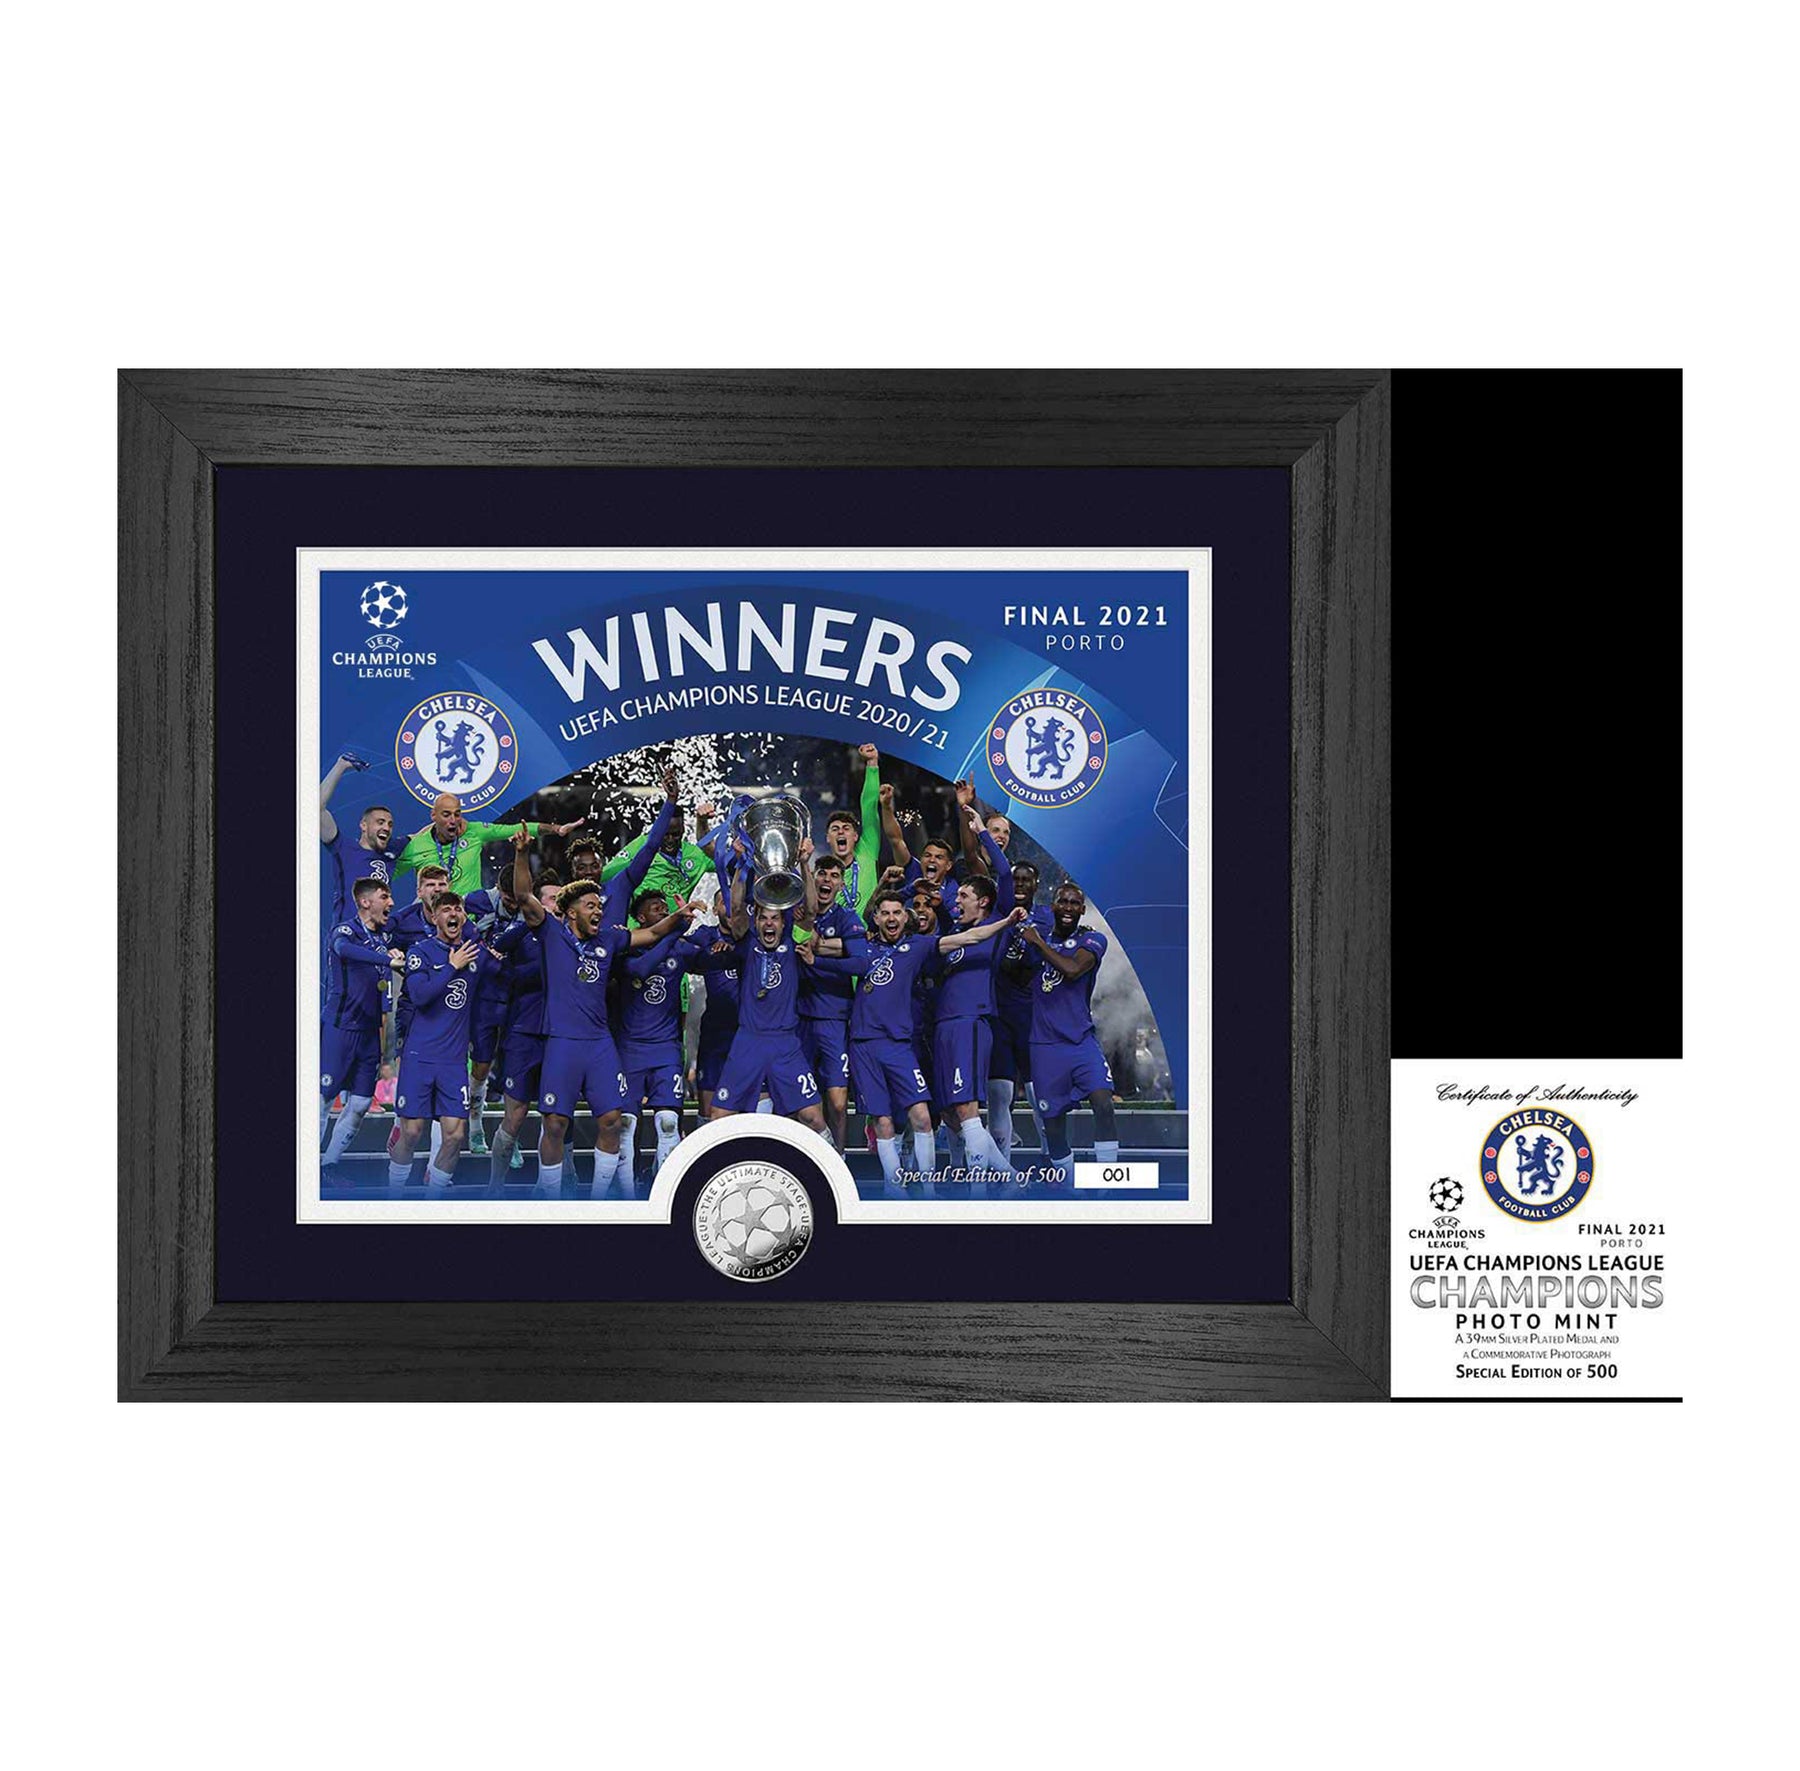 Champions League Chelsea 2021 Commemorative Coin in Framed Photo